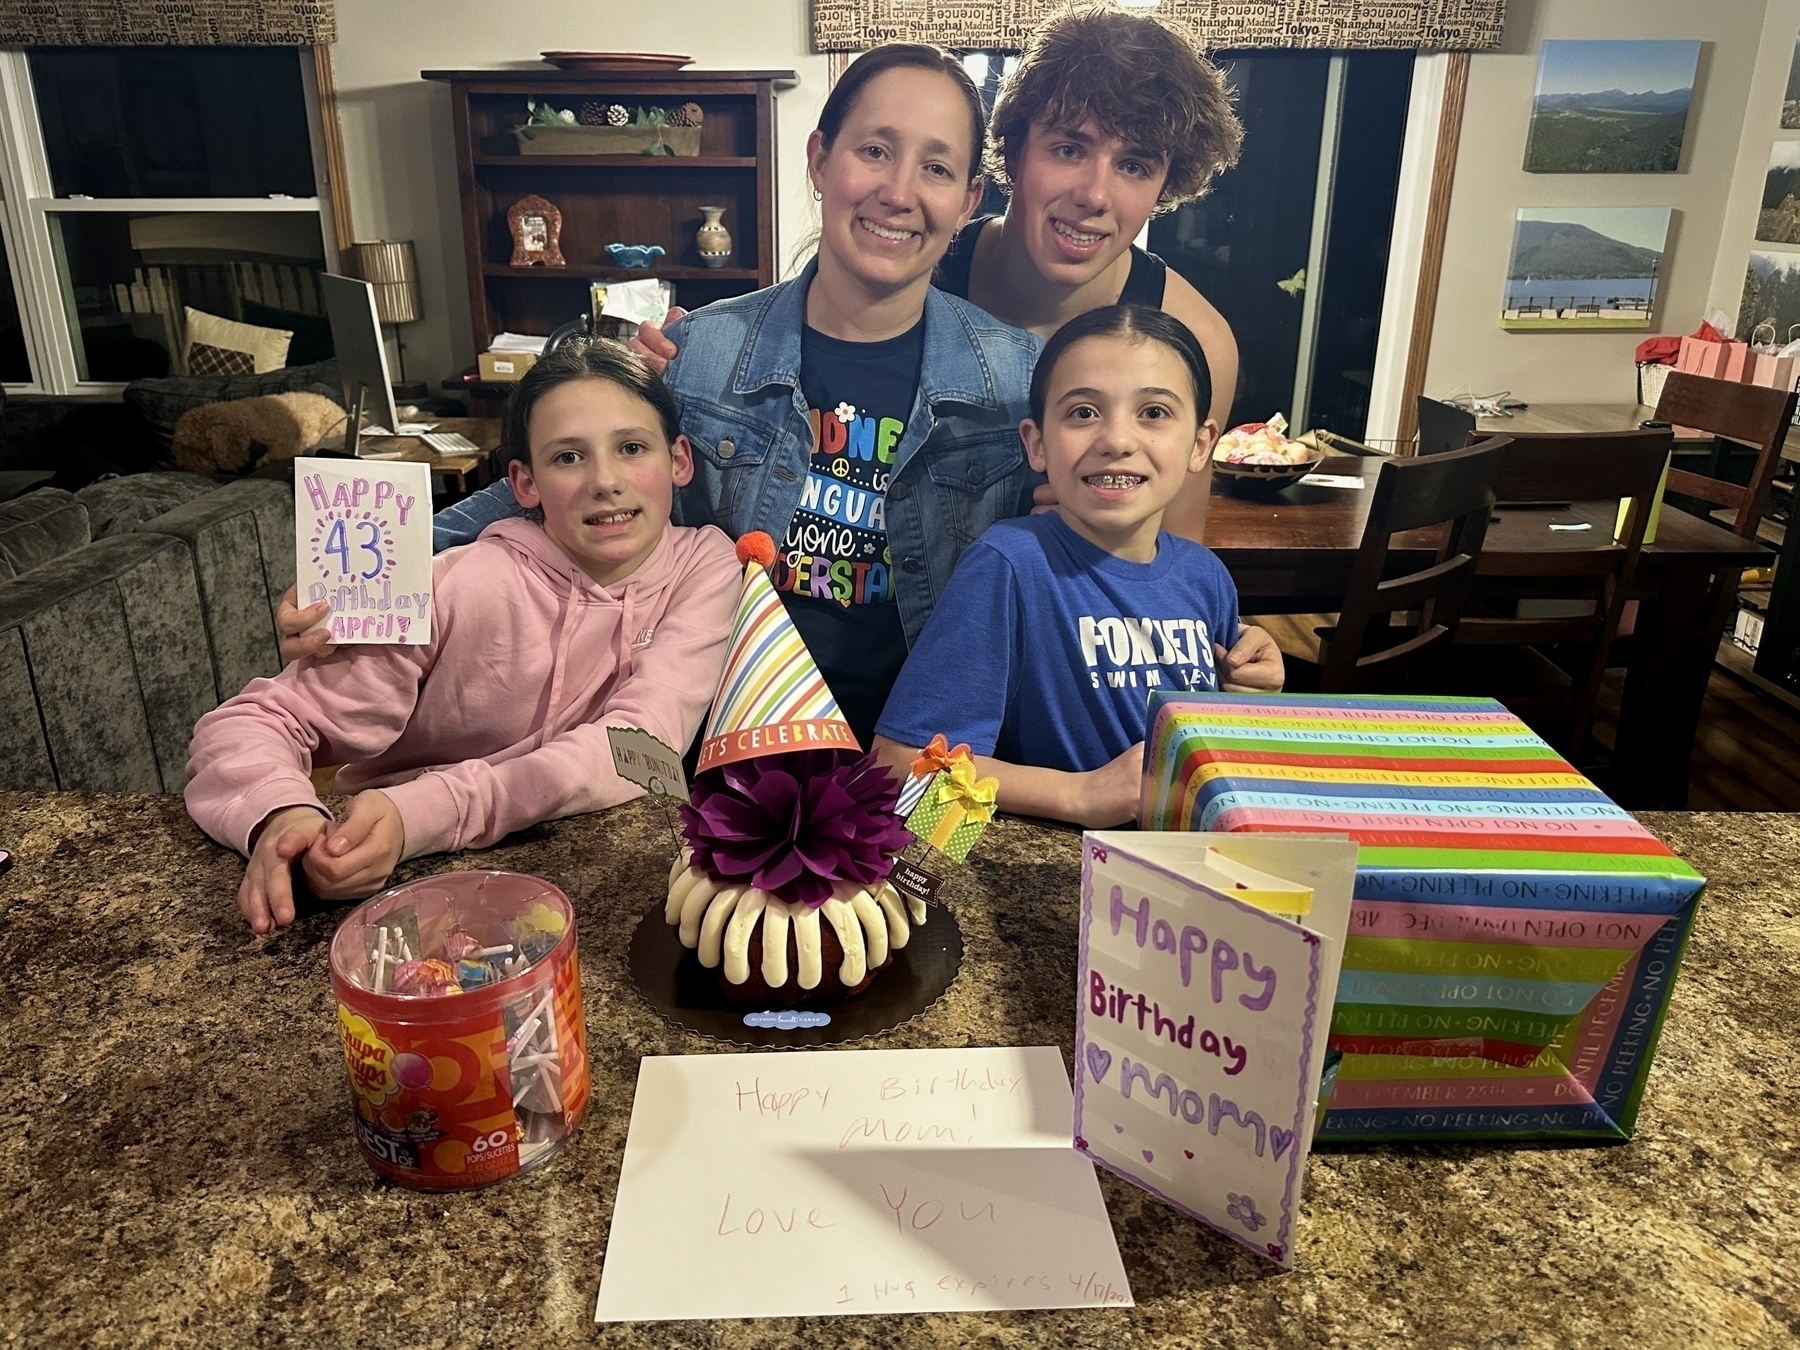 A family celebrates a birthday at home, surrounding a cake with presents and handmade cards reading “Happy 43rd Birthday April” and “Happy Birthday Mommy… Love You.”